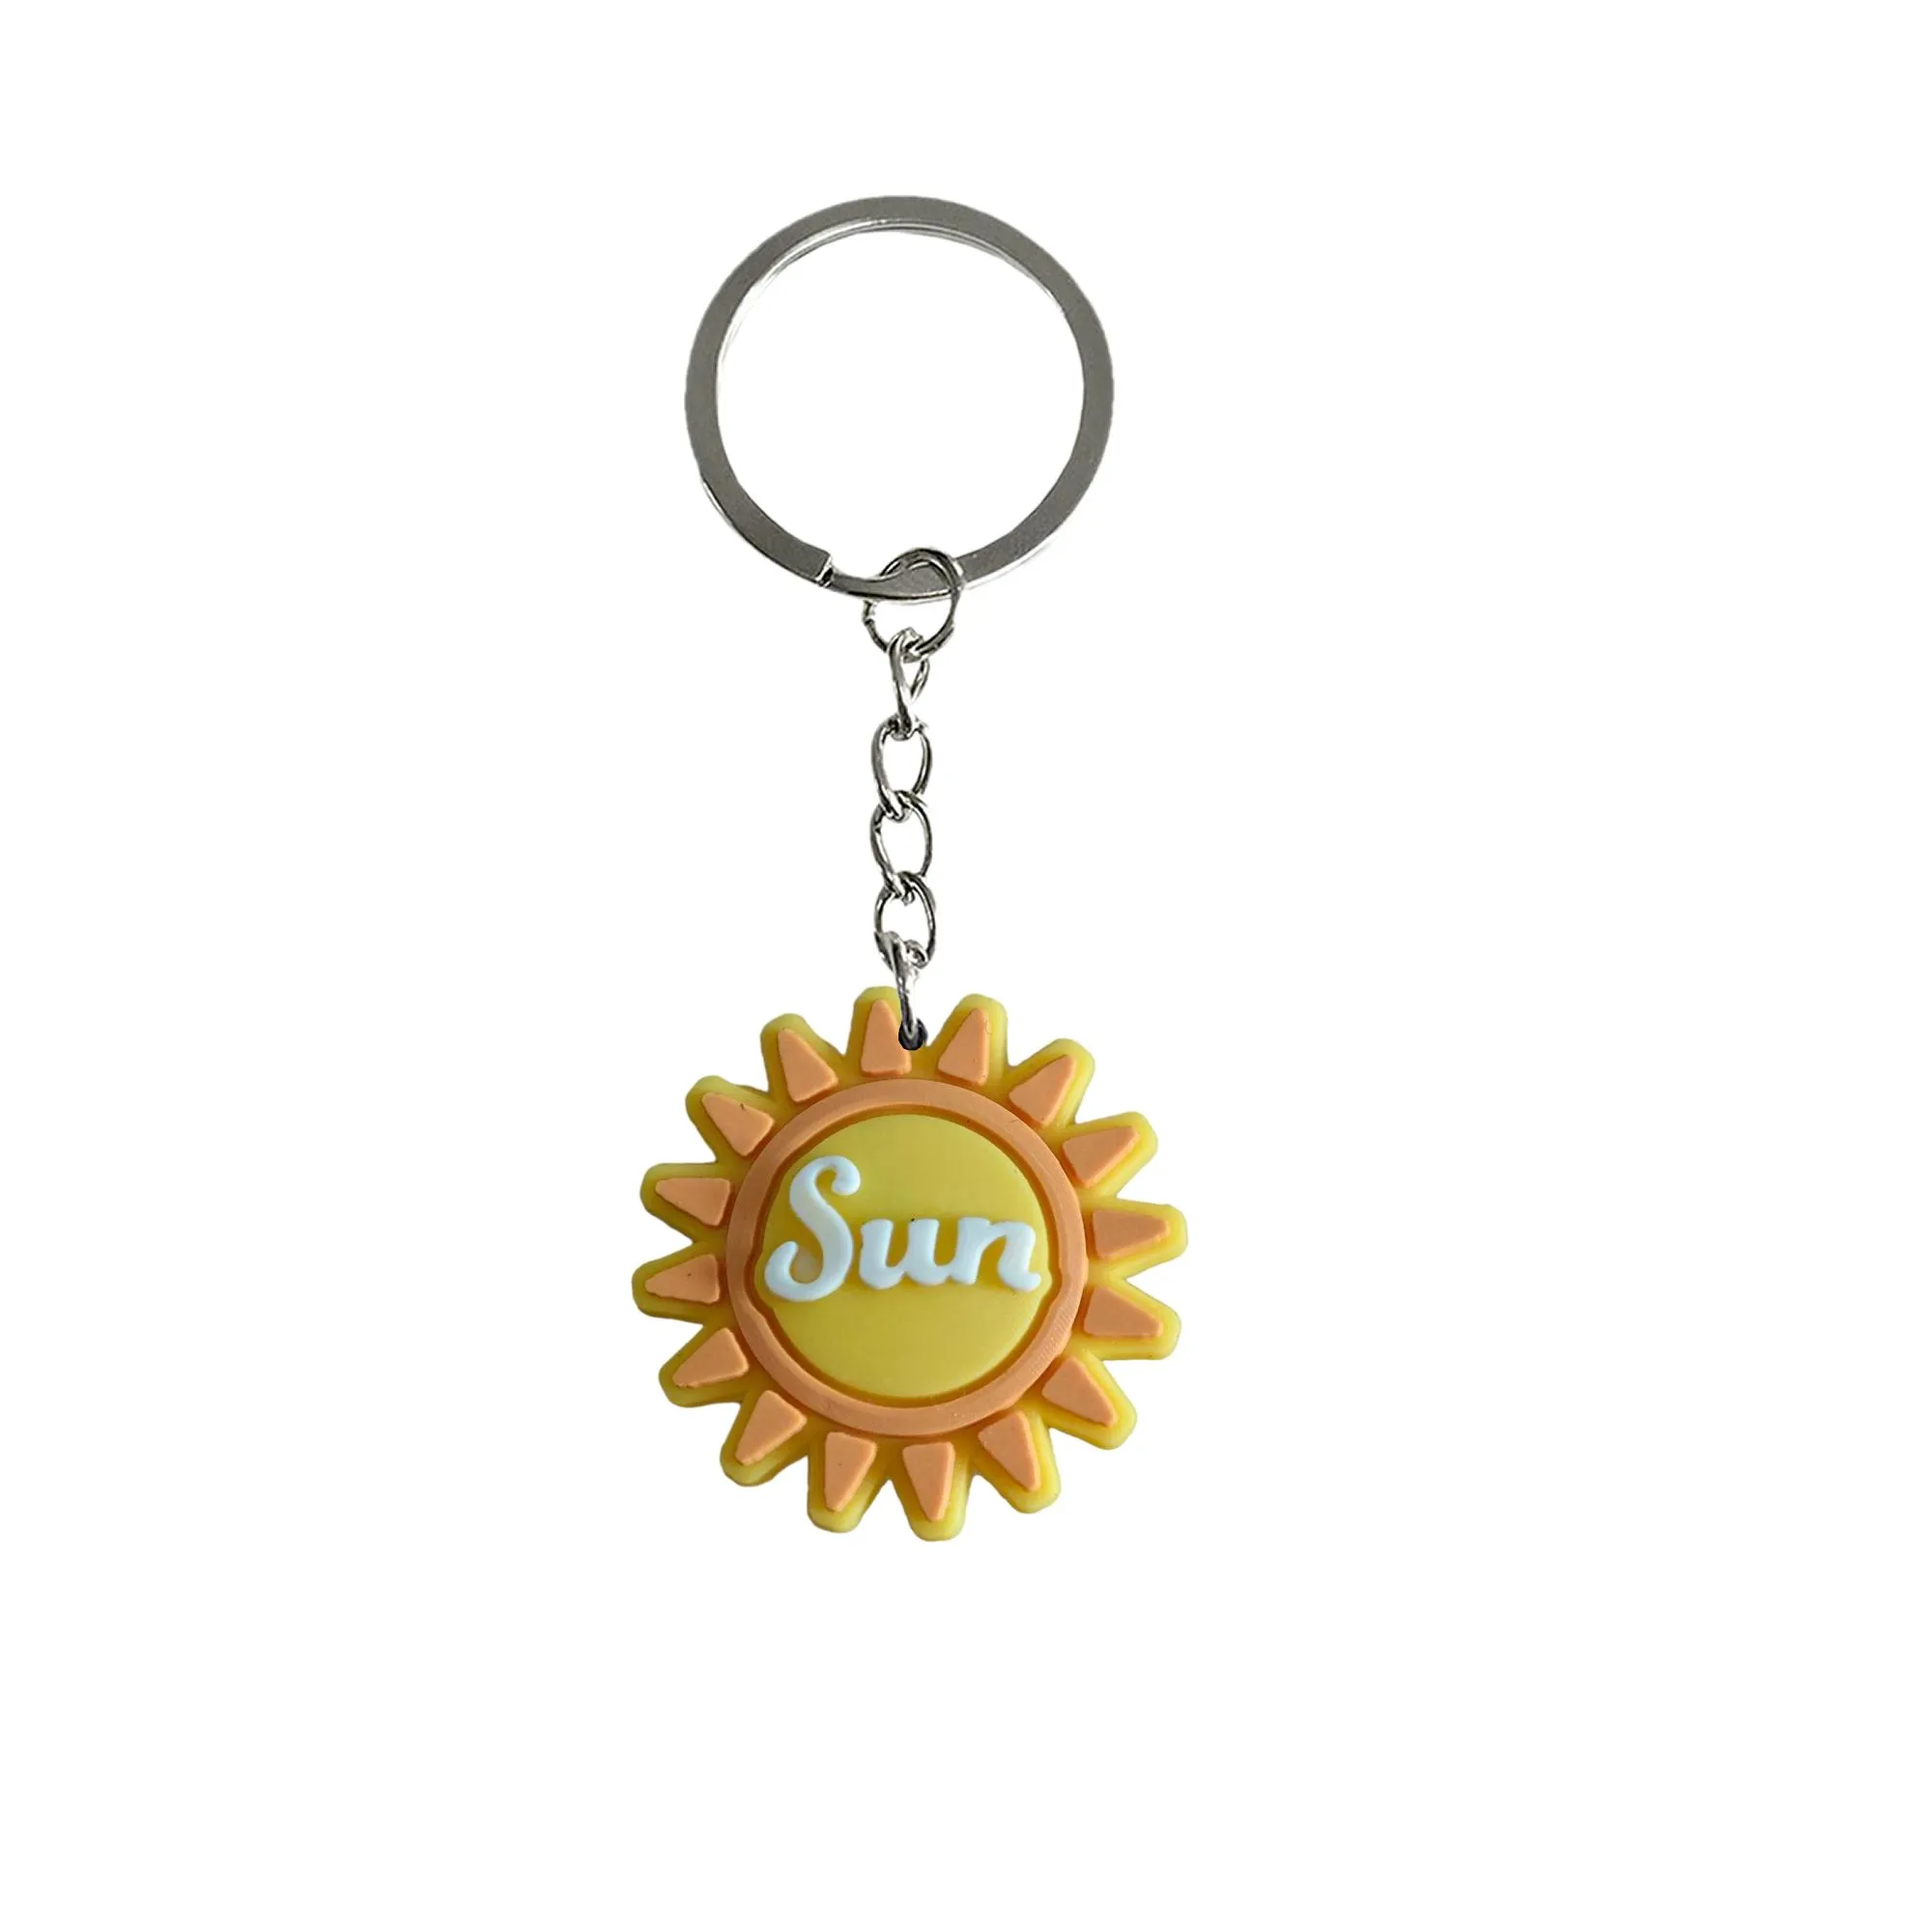 sun keychain keychains for women goodie bag stuffers supplies keyring backpacks suitable schoolbag boys backpack key chain kid boy girl party favors gift